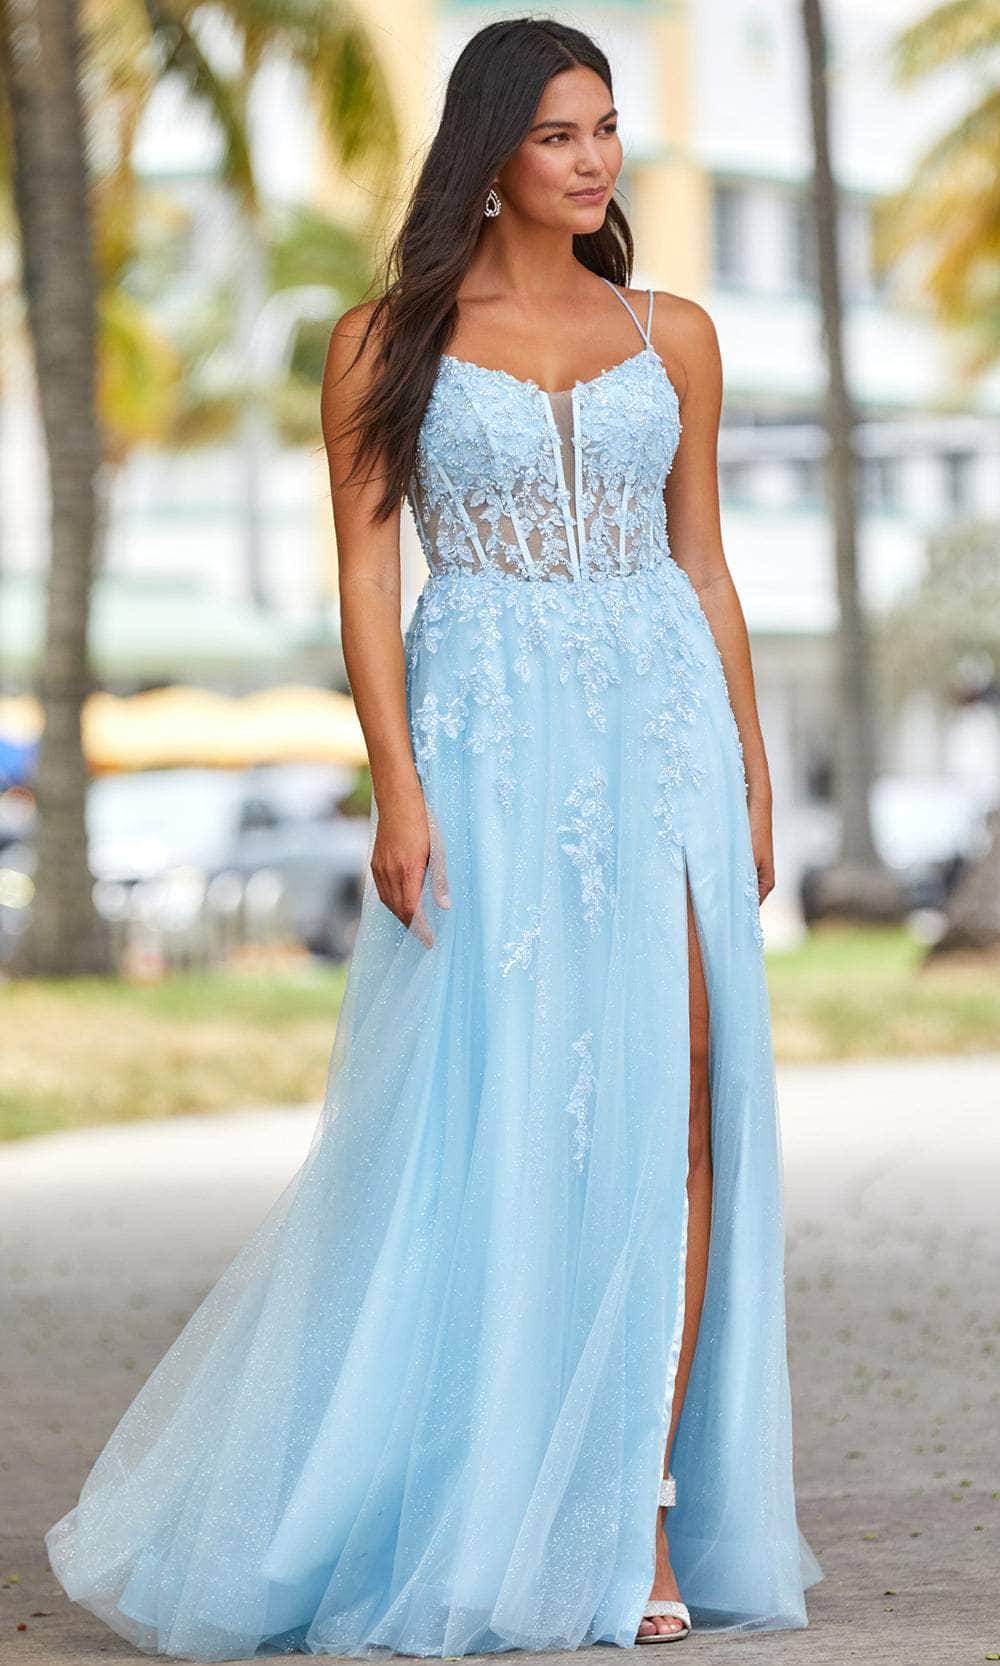 Macloth Long Sleeves Gold Lace Satin Prom Dress Sky Blue Formal Evening Gown US14 / Custom Color